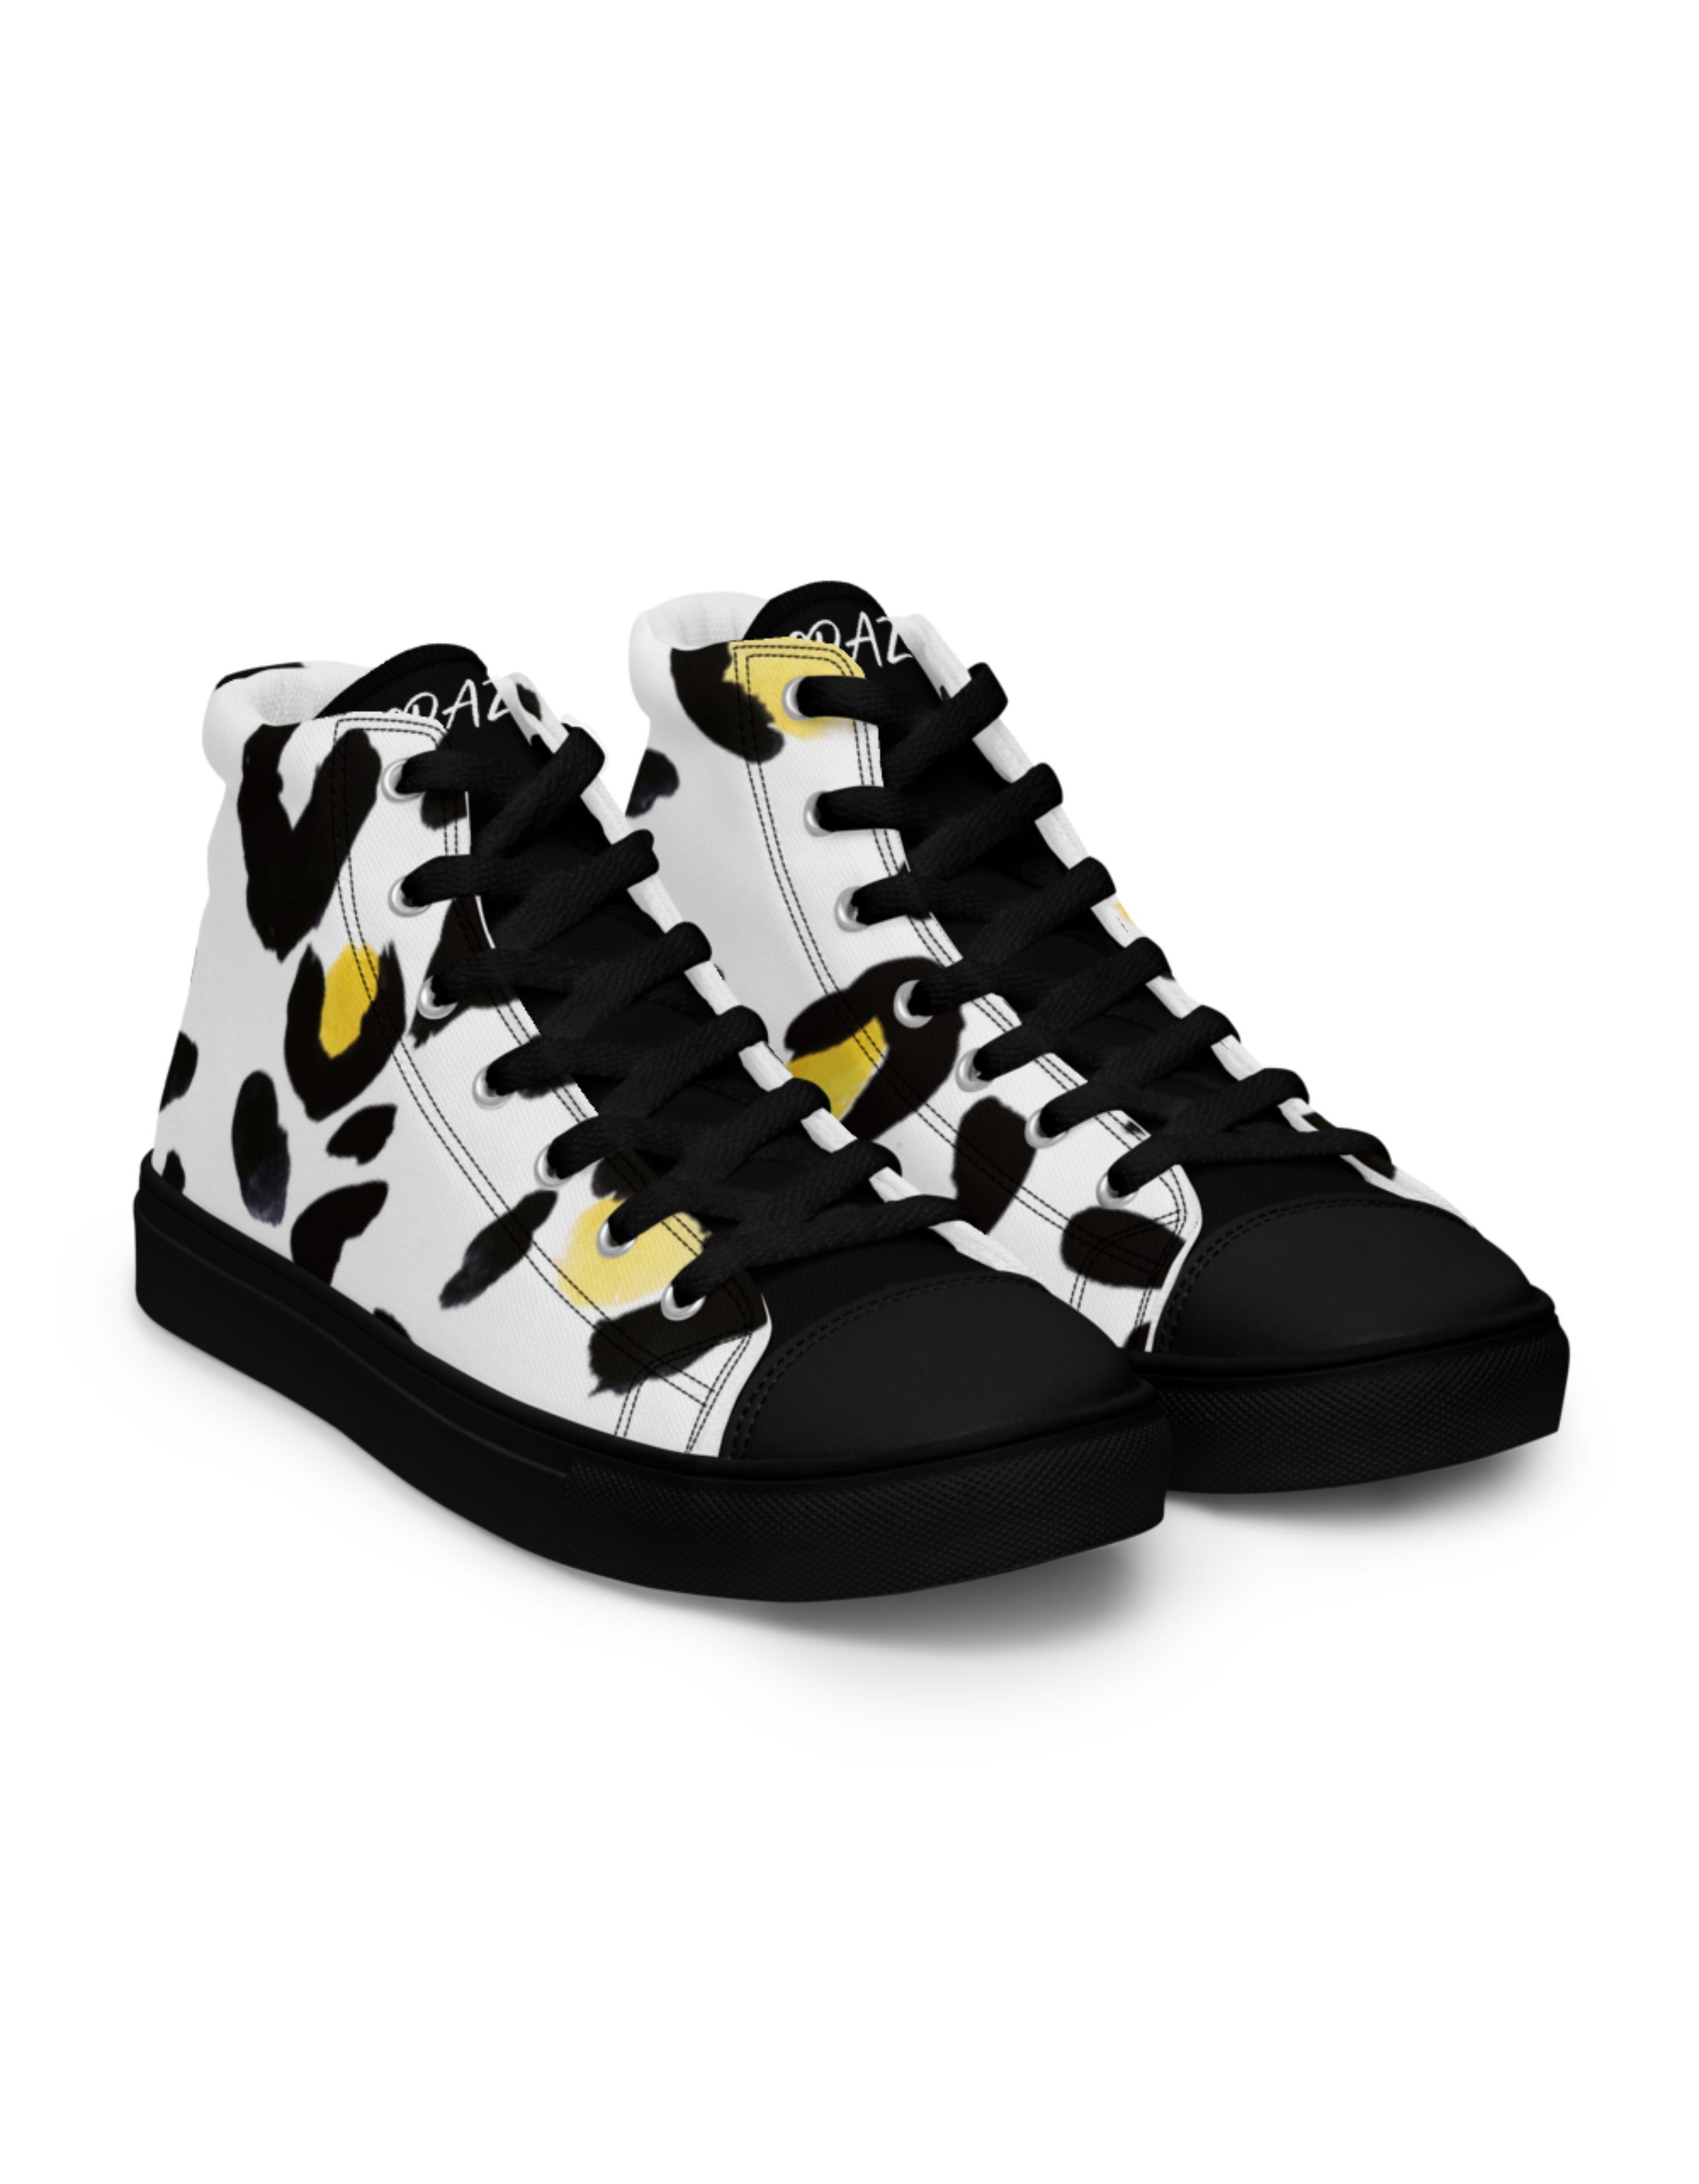 LEOPARD men's white high-top canvas sneakers